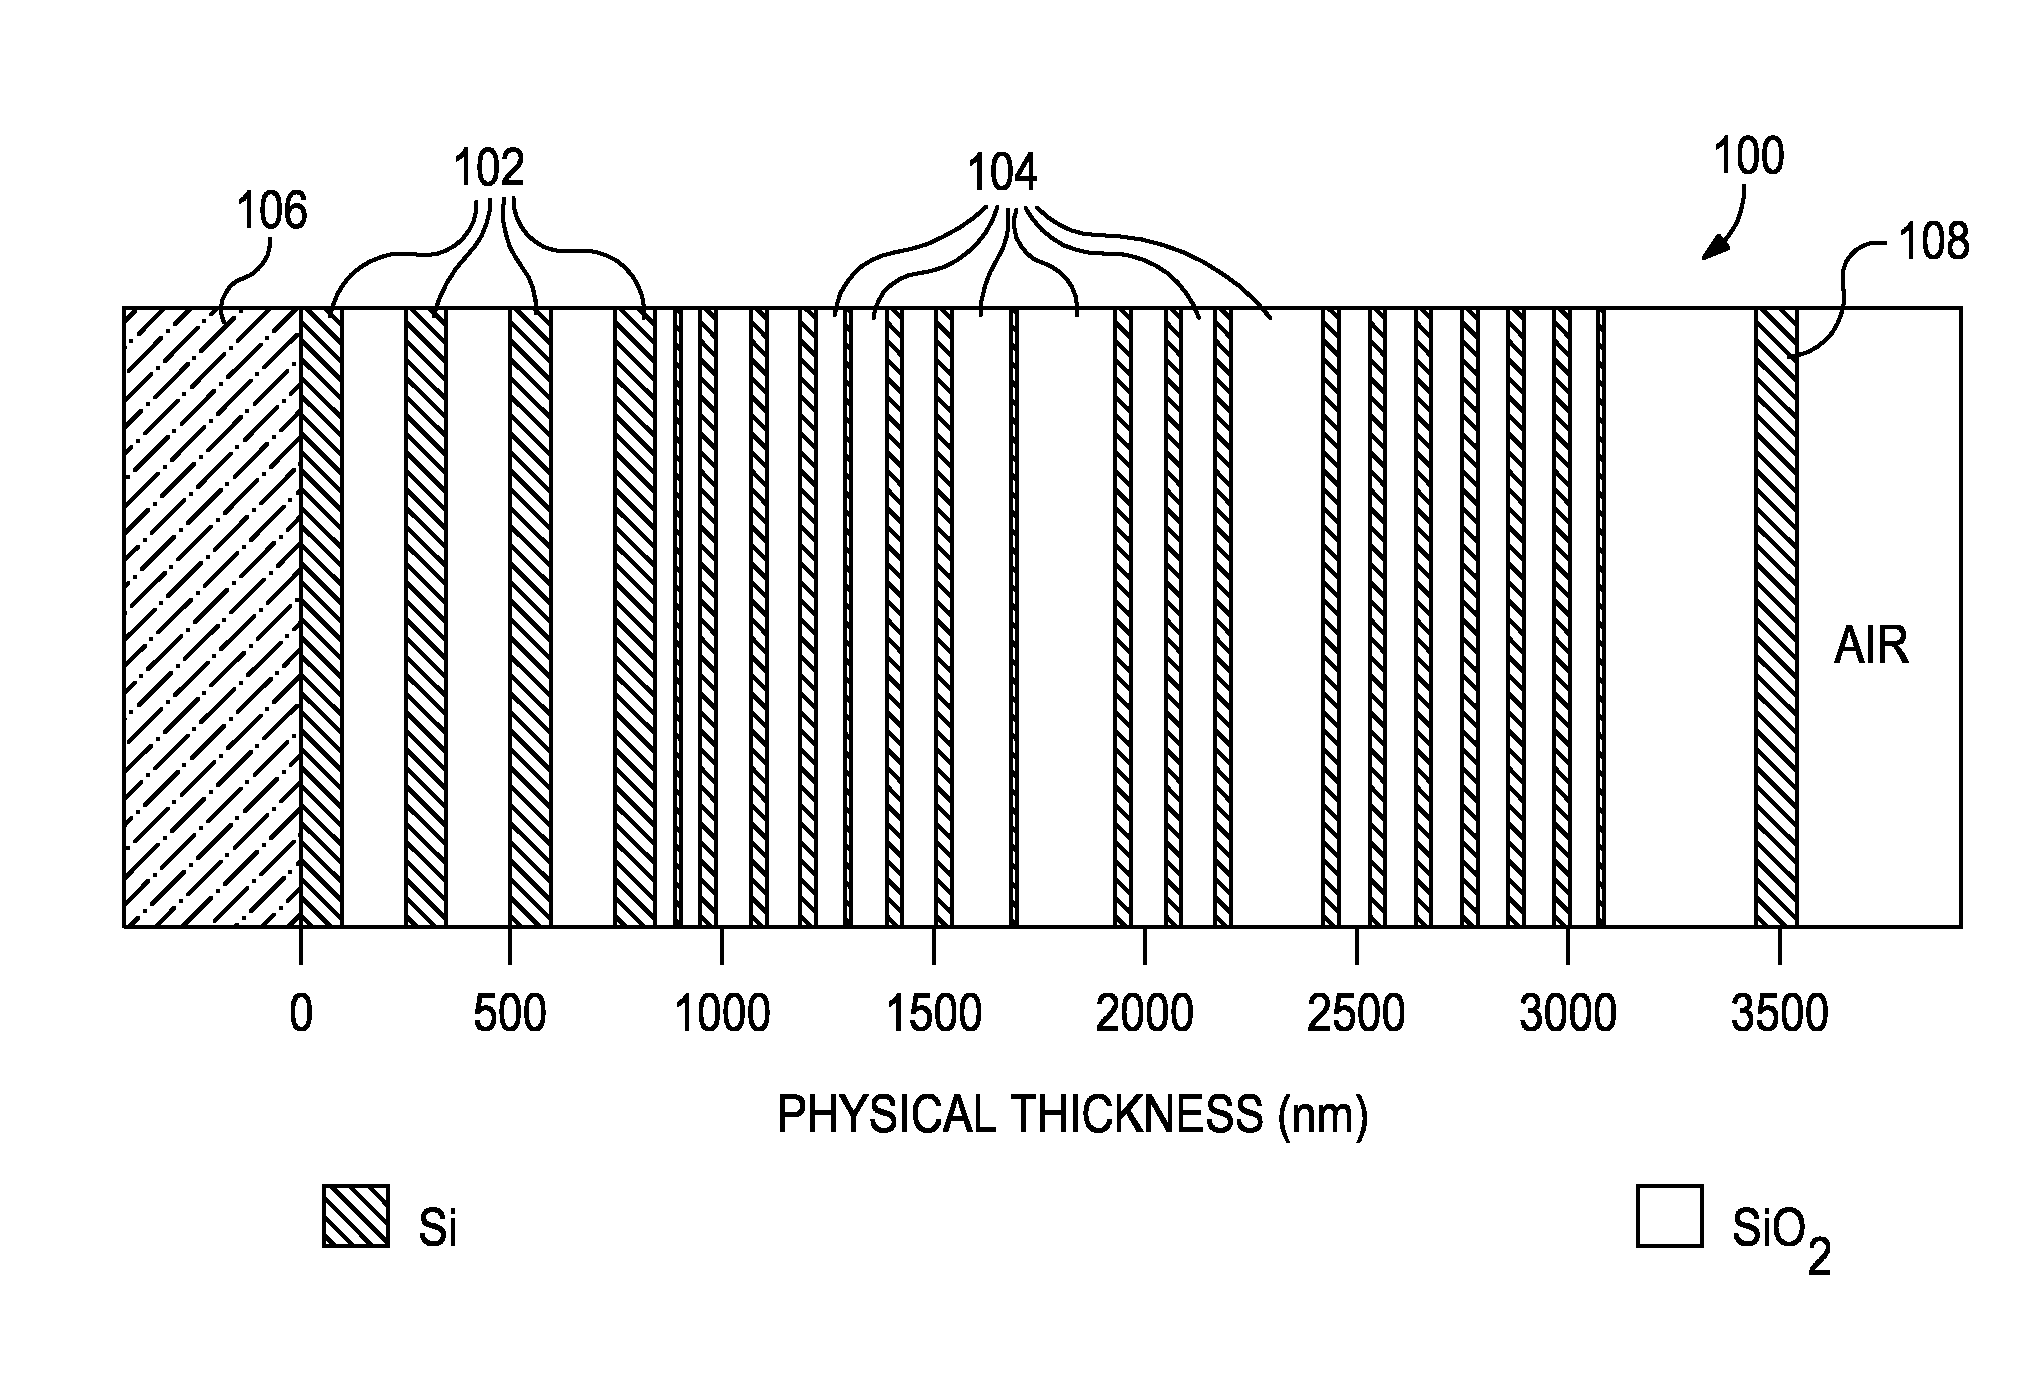 Imaging Systems for Optical Computing Devices